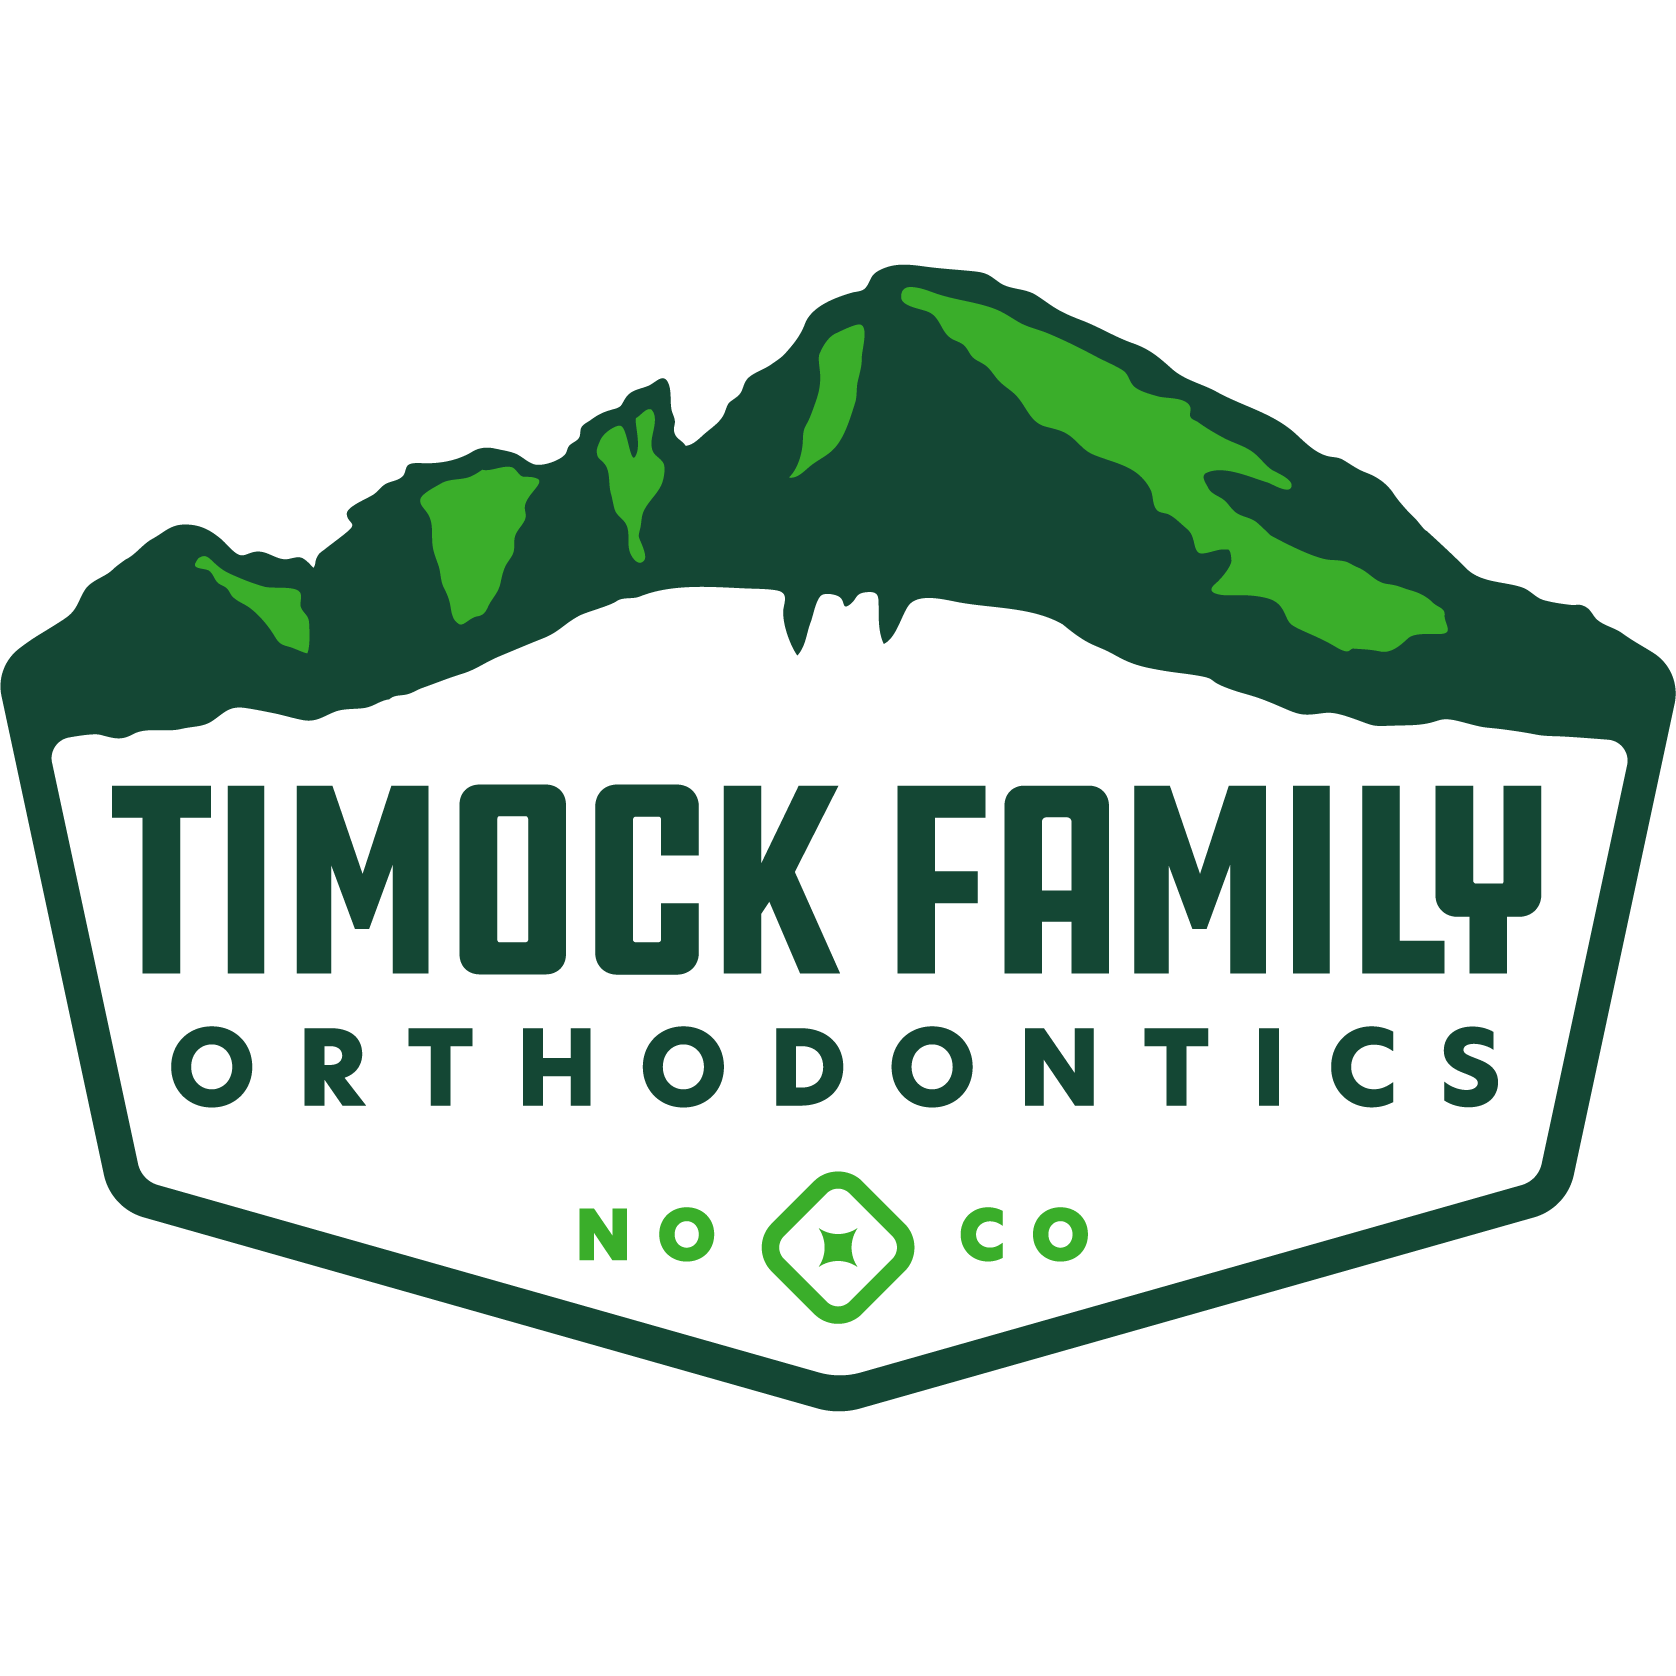 Timock Family Orthodontics - Fort Collins, CO 80525 - (970)484-4102 | ShowMeLocal.com